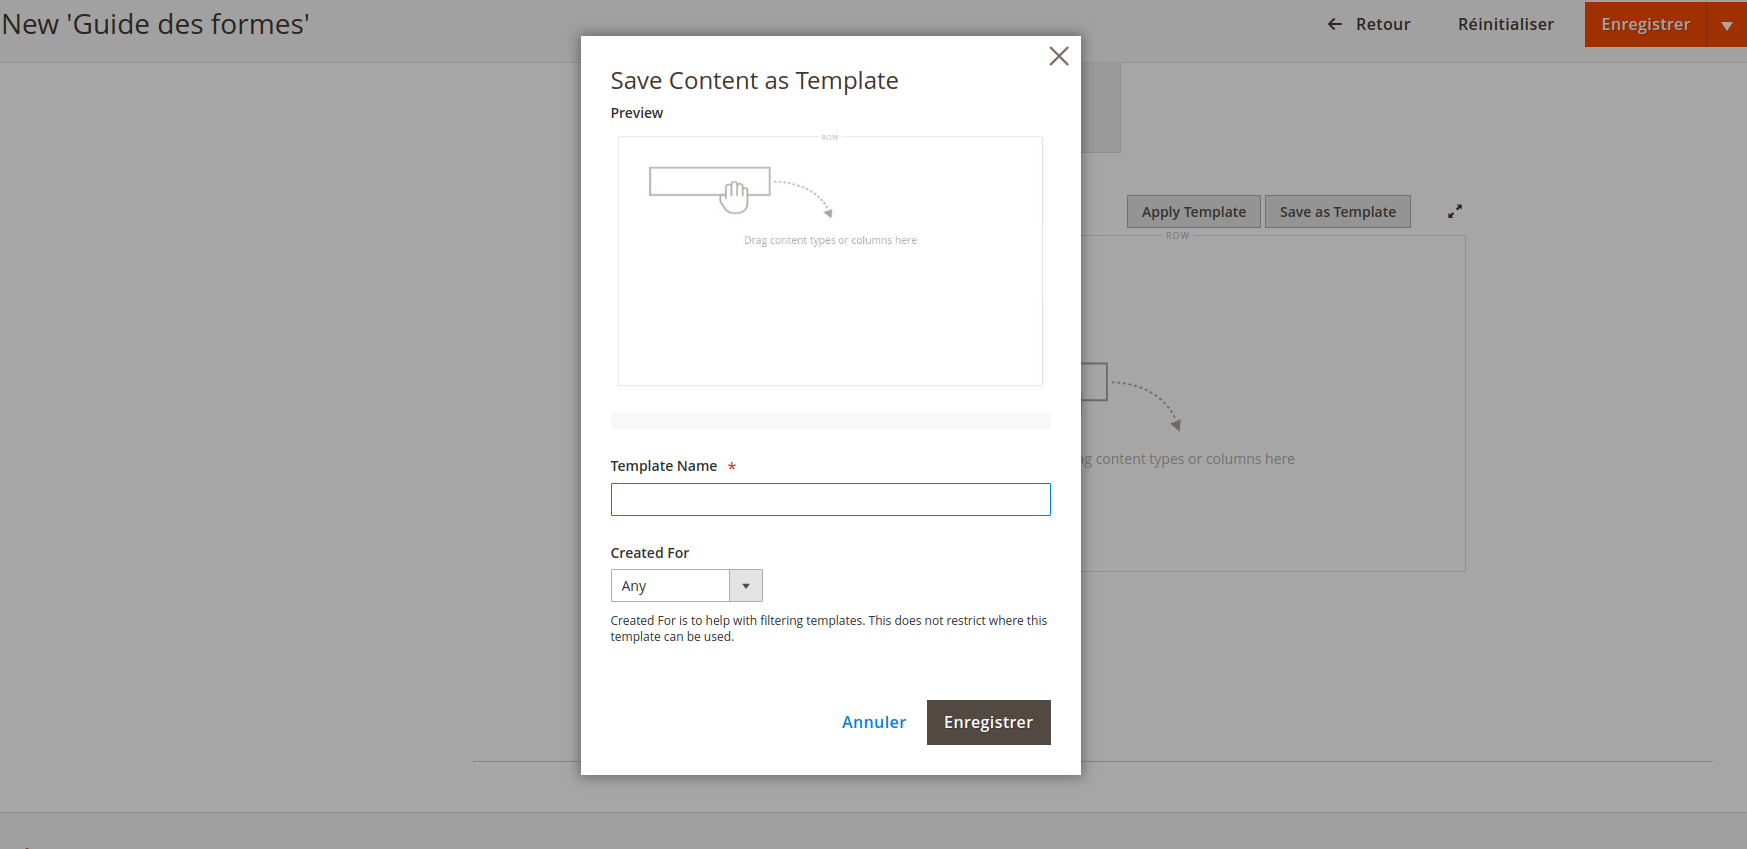 Save Page Builder templates or apply templates you previously created.